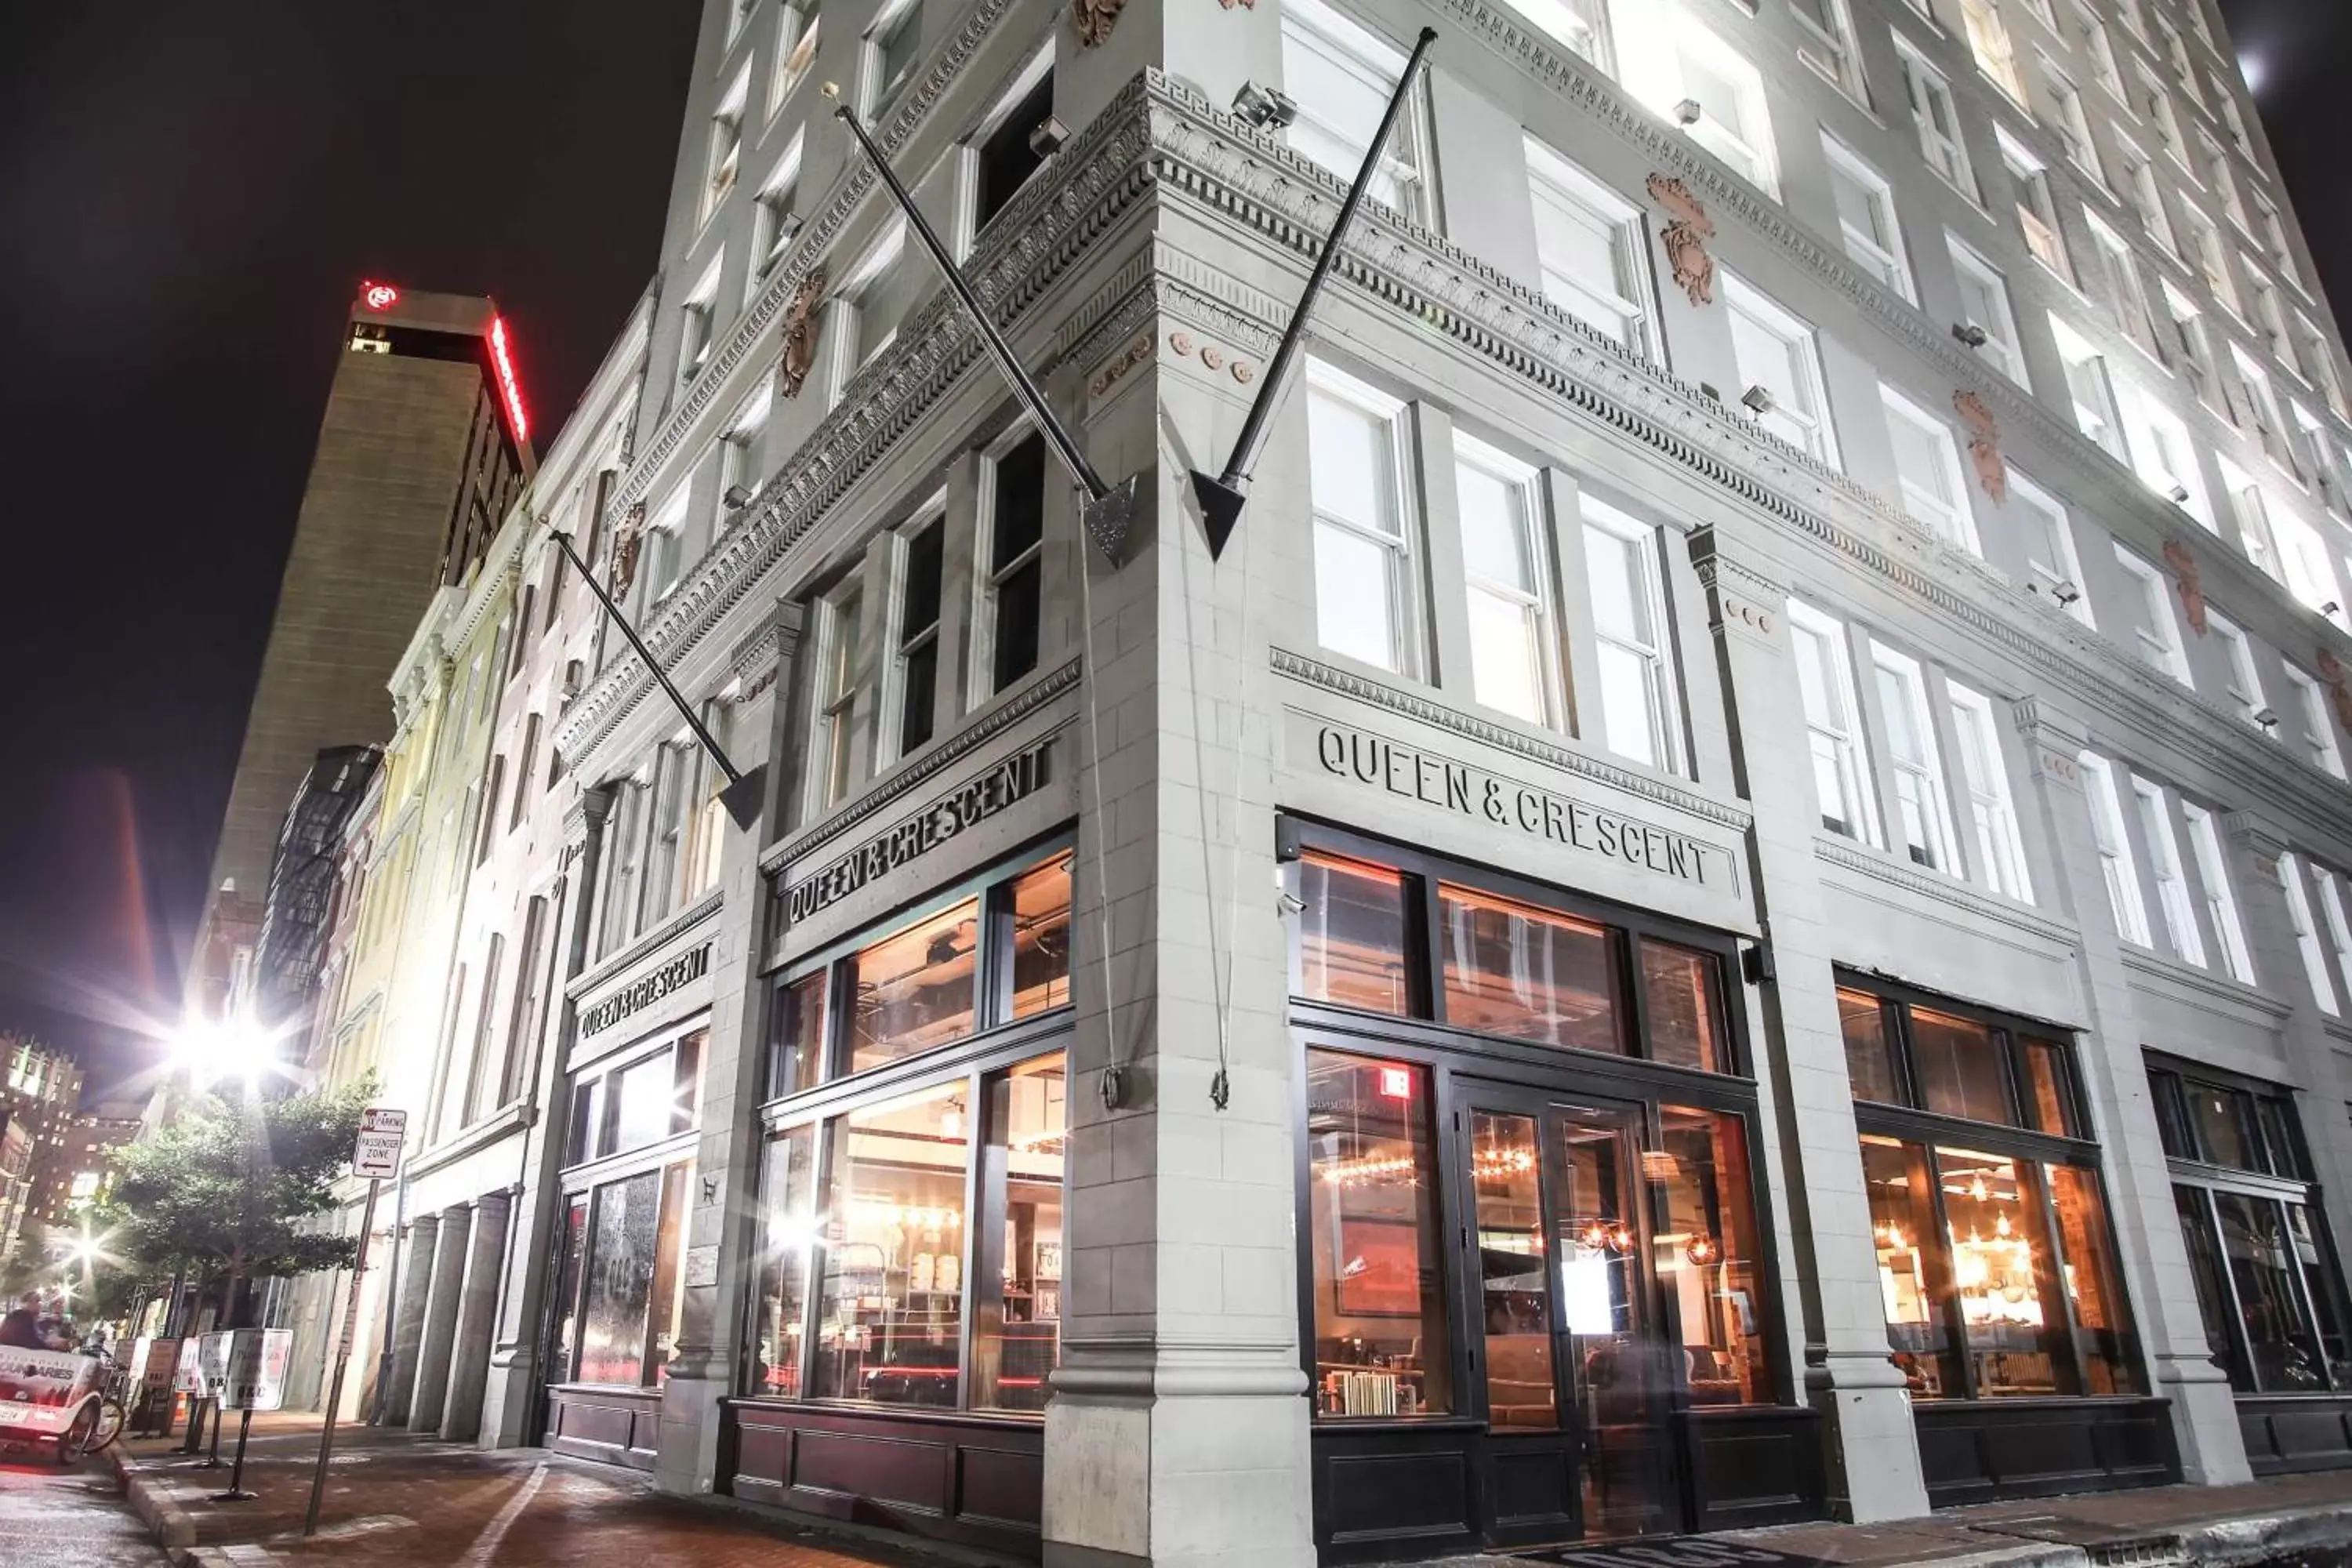 Property Building in Q&C Hotel and Bar New Orleans, Autograph Collection